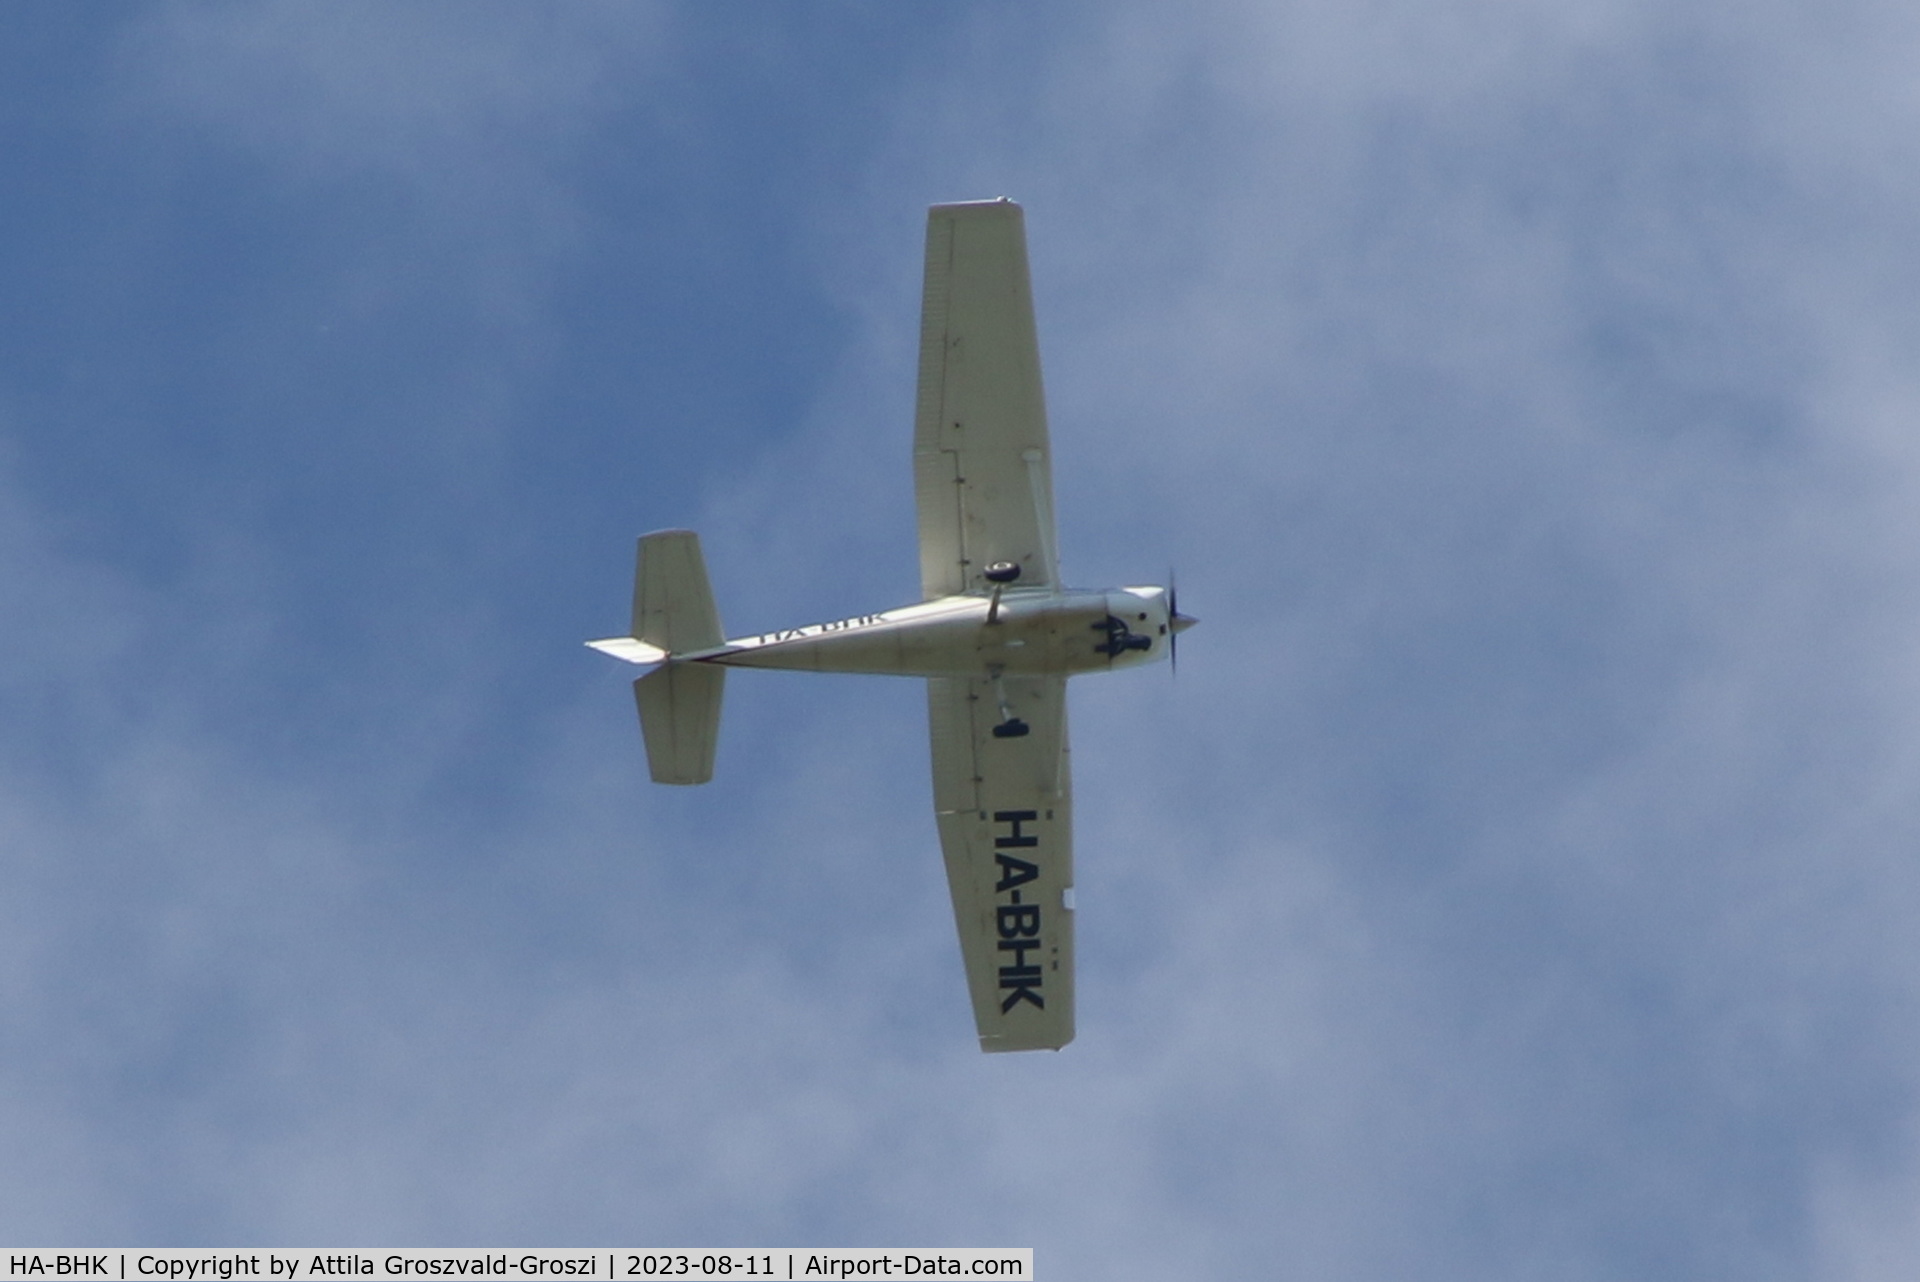 HA-BHK, 1967 Reims F150H C/N 270, In the airspace of the city of Ráckeve, Hungary